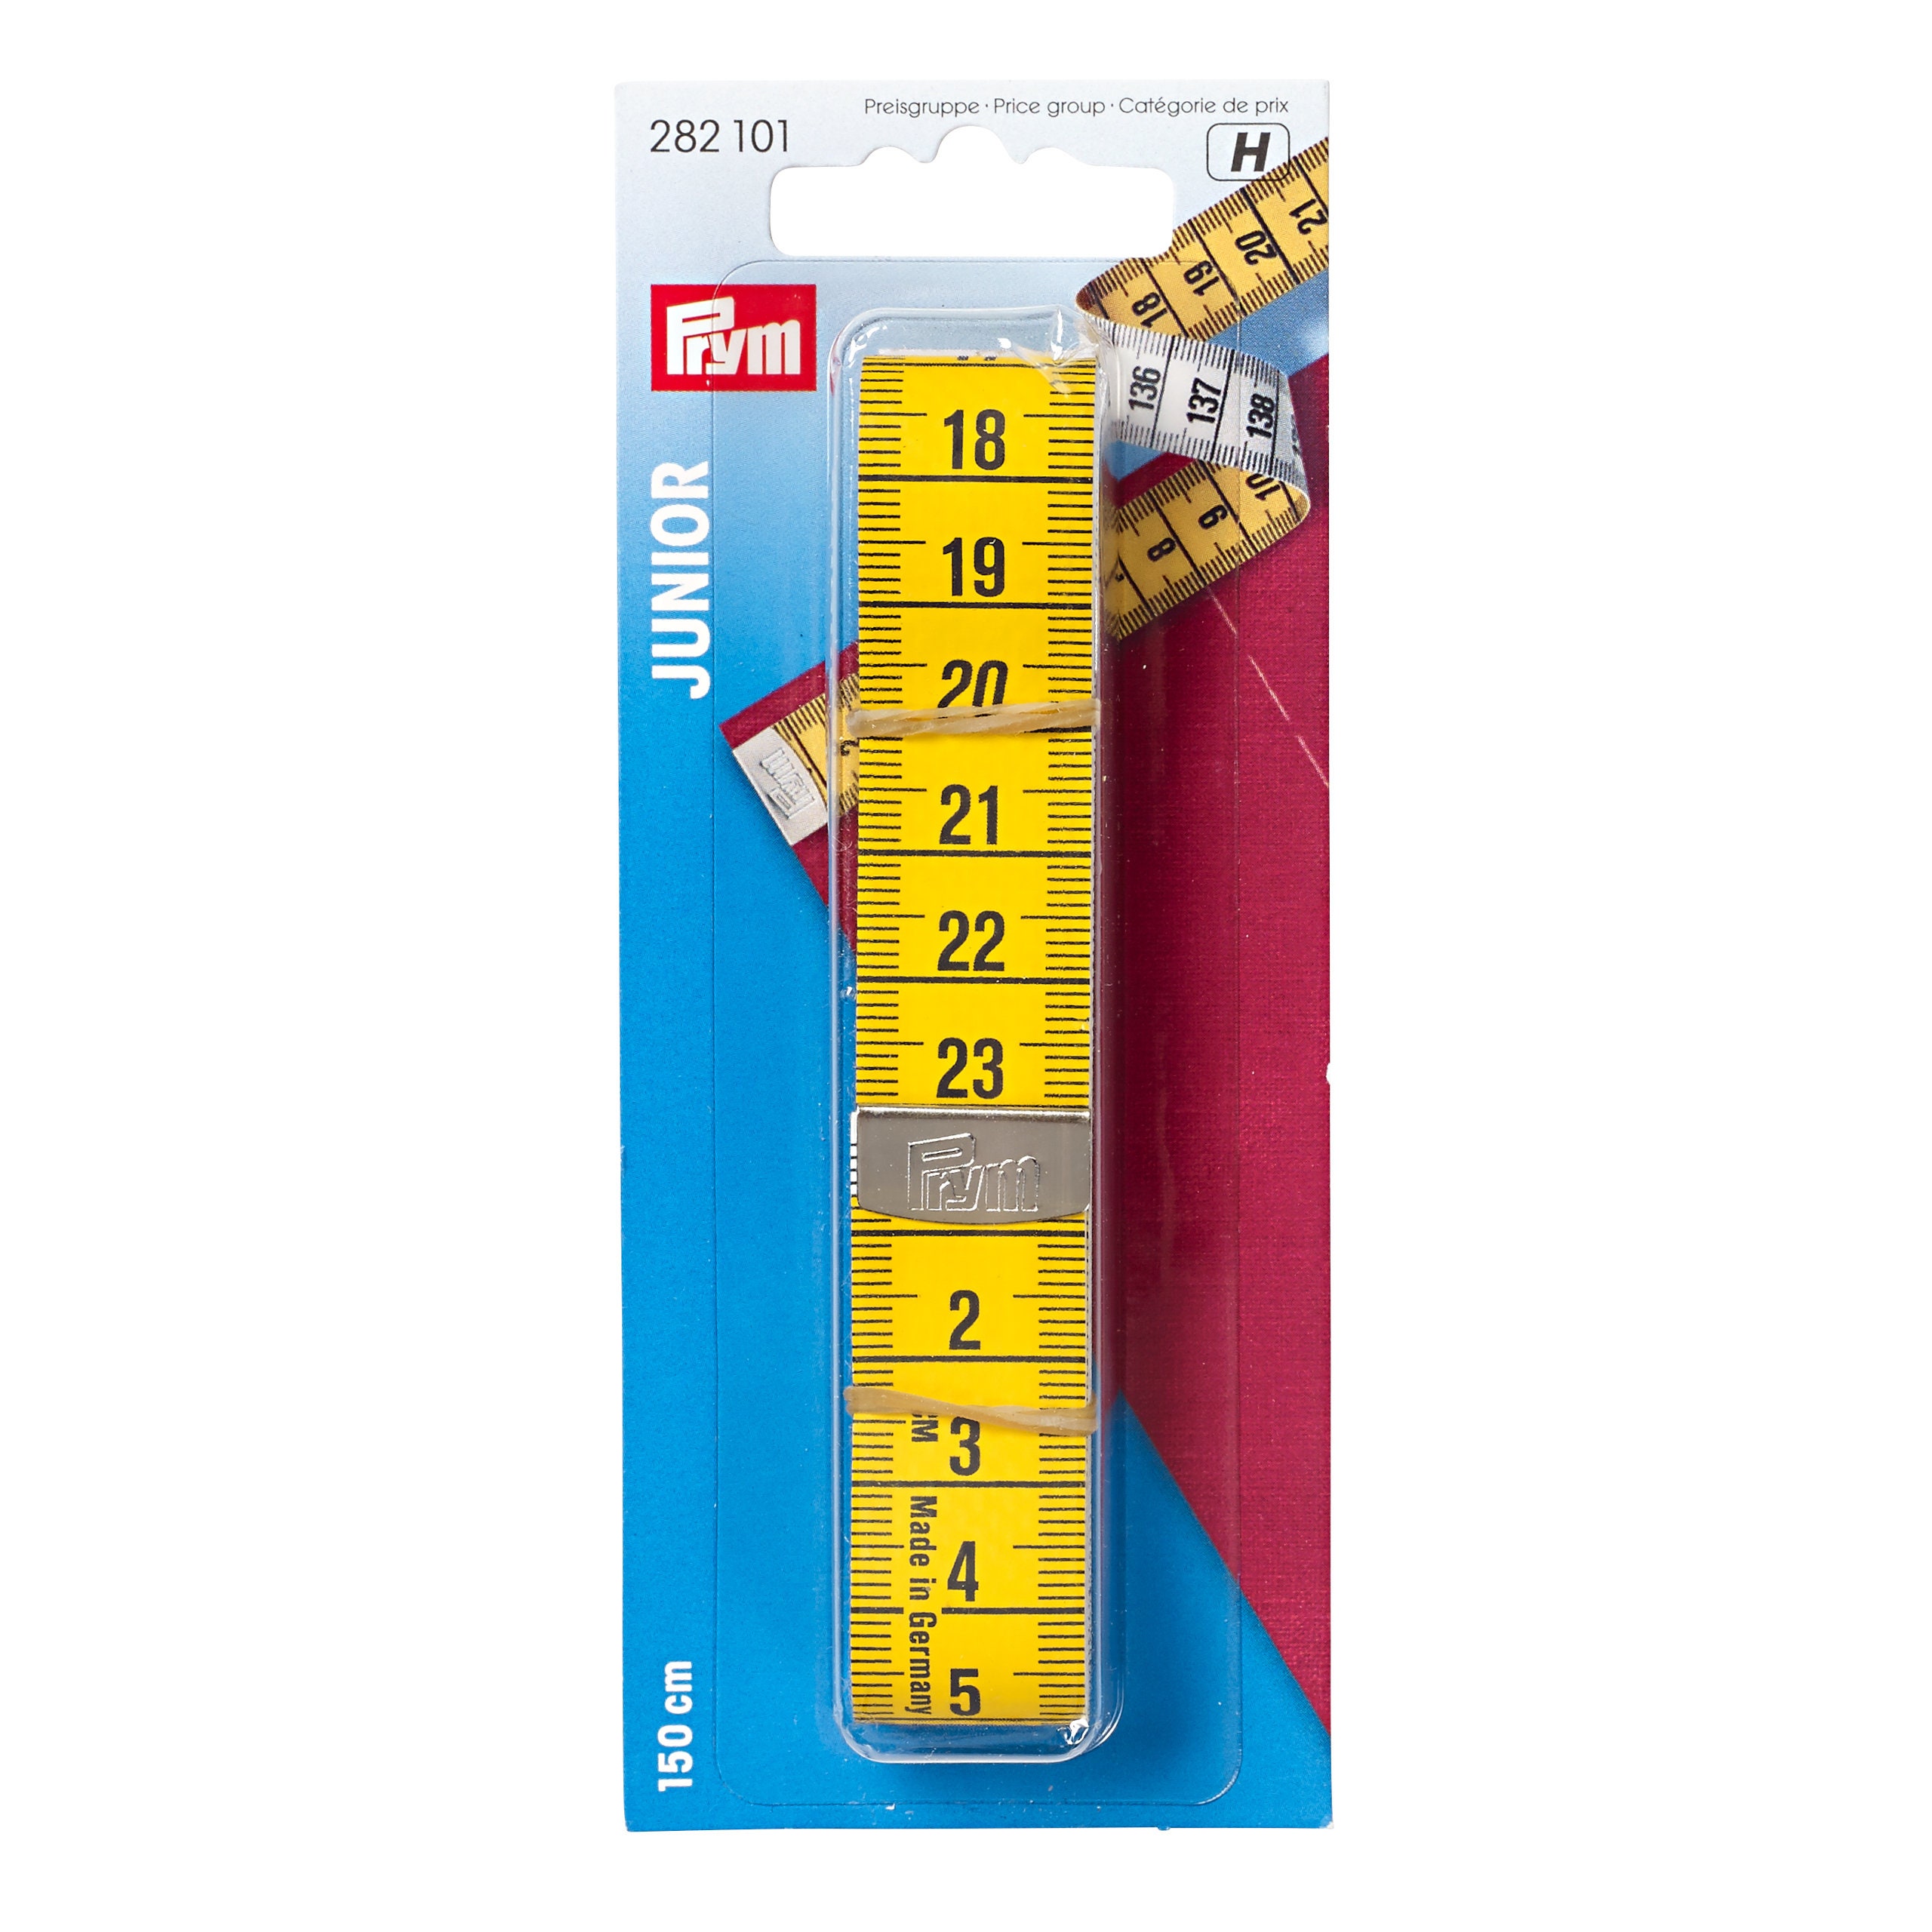 Ruler Millimeter Inch Inch A4 to Print Tape Measure Scale 250 Mm 10 Inch  Inch PDF 